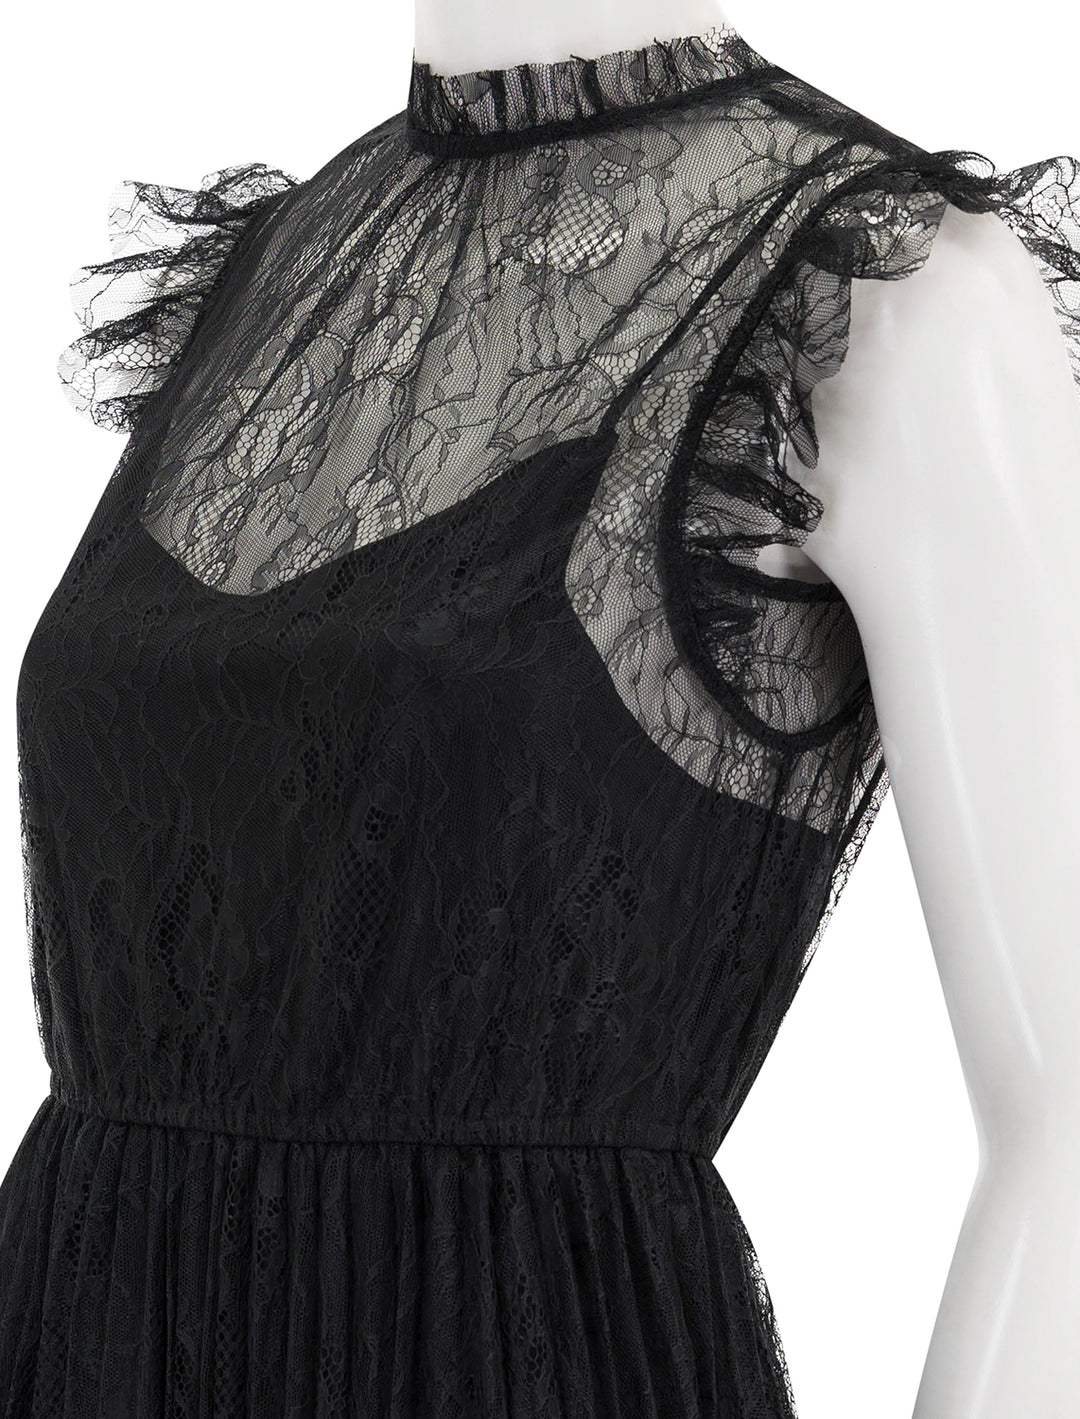 Close-up view of Steve Madden's Izzo Dress in Black.